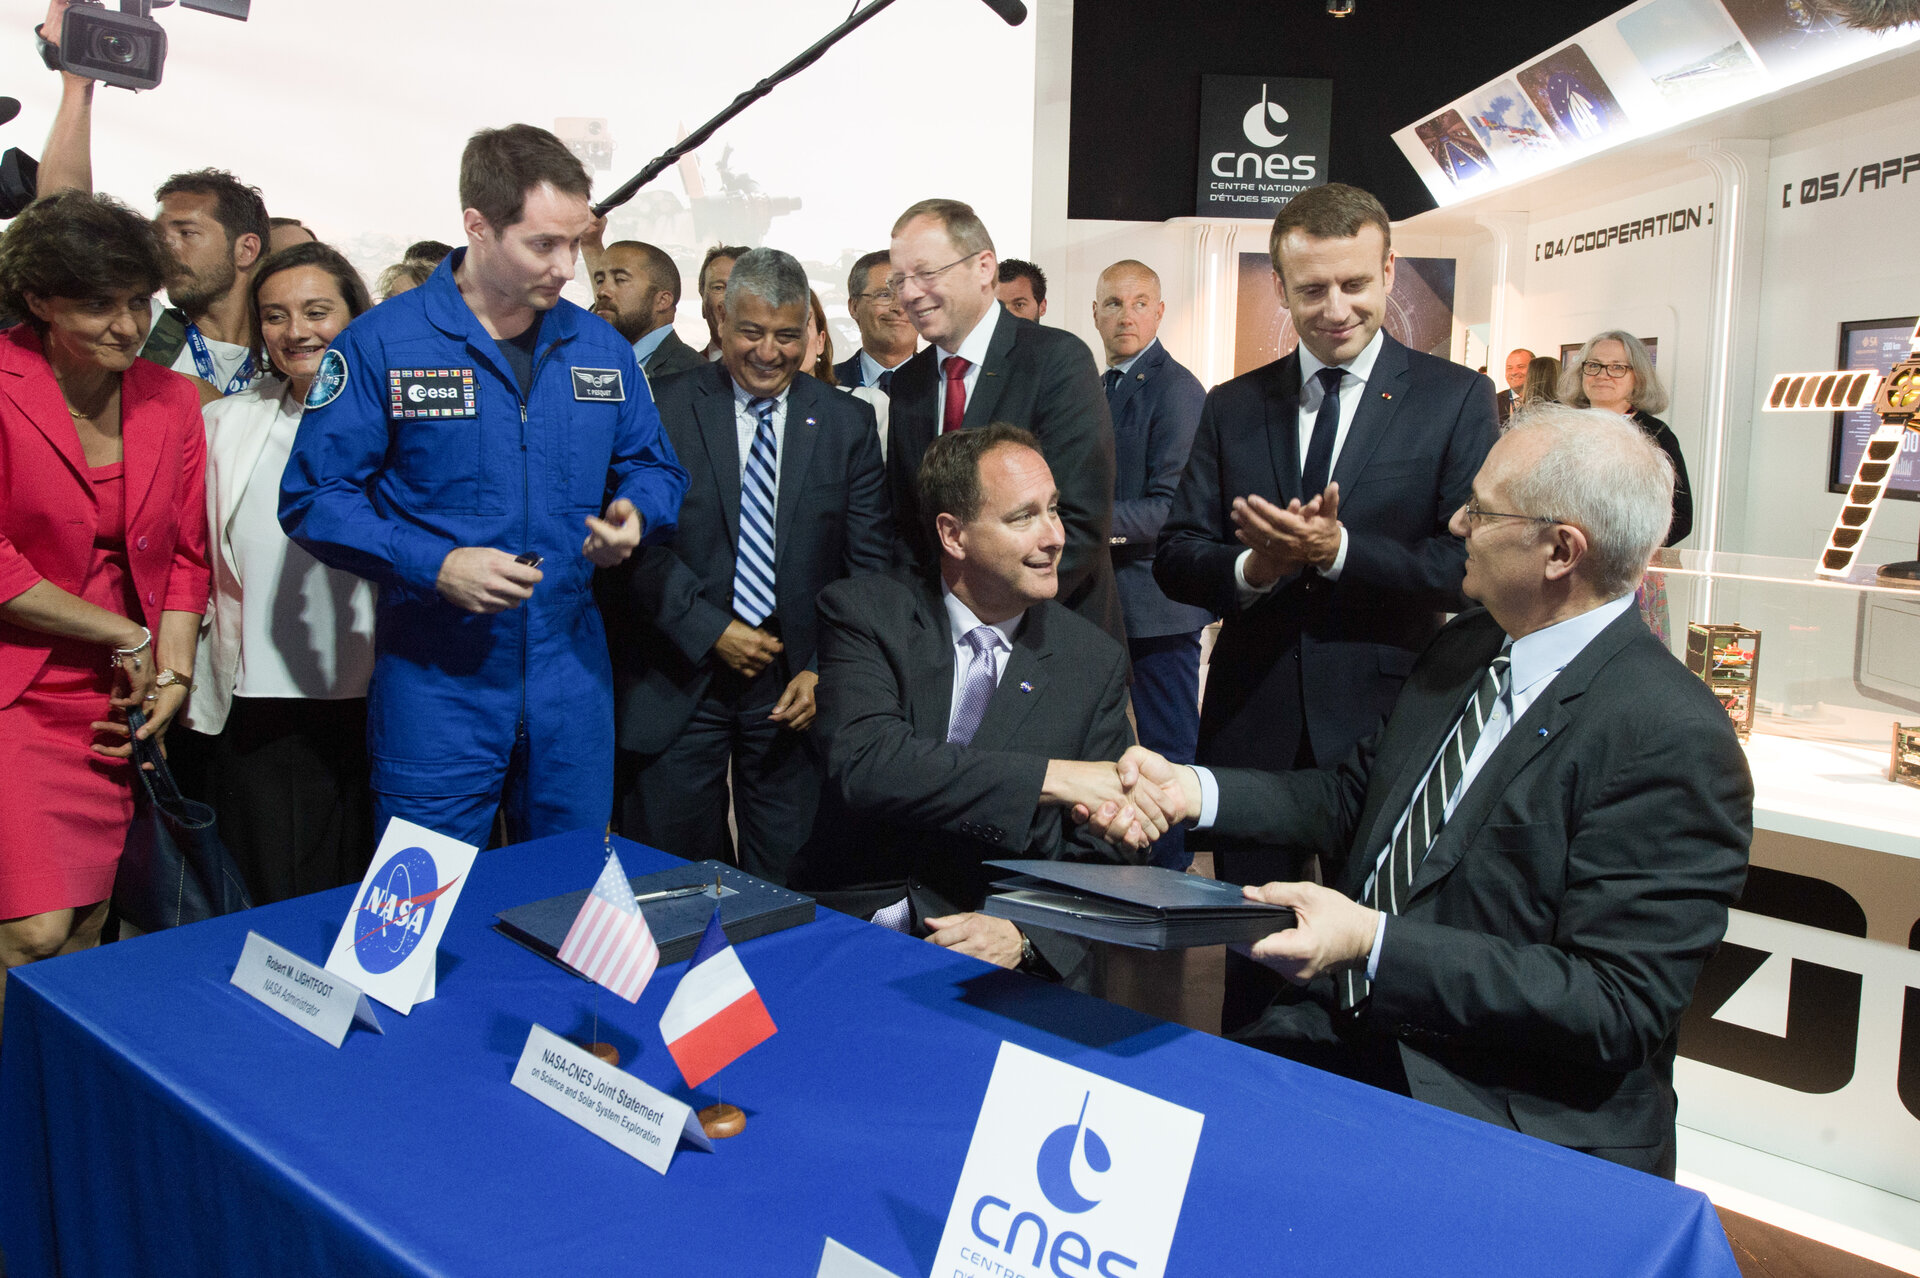 NASA and CNES express Commitment to Joint Exploration